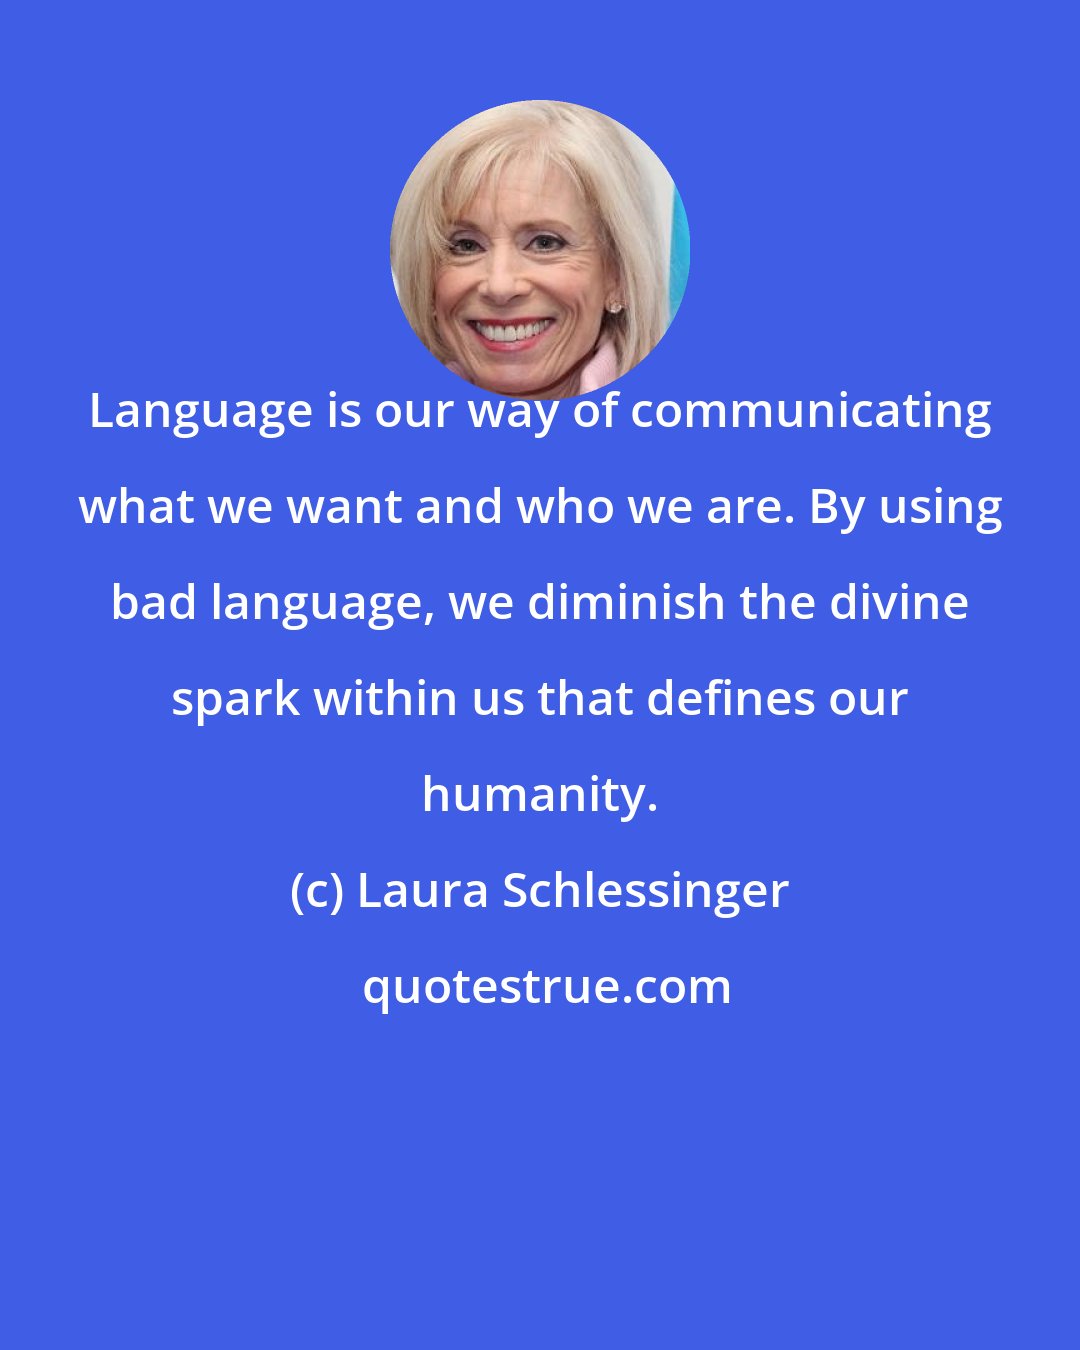 Laura Schlessinger: Language is our way of communicating what we want and who we are. By using bad language, we diminish the divine spark within us that defines our humanity.